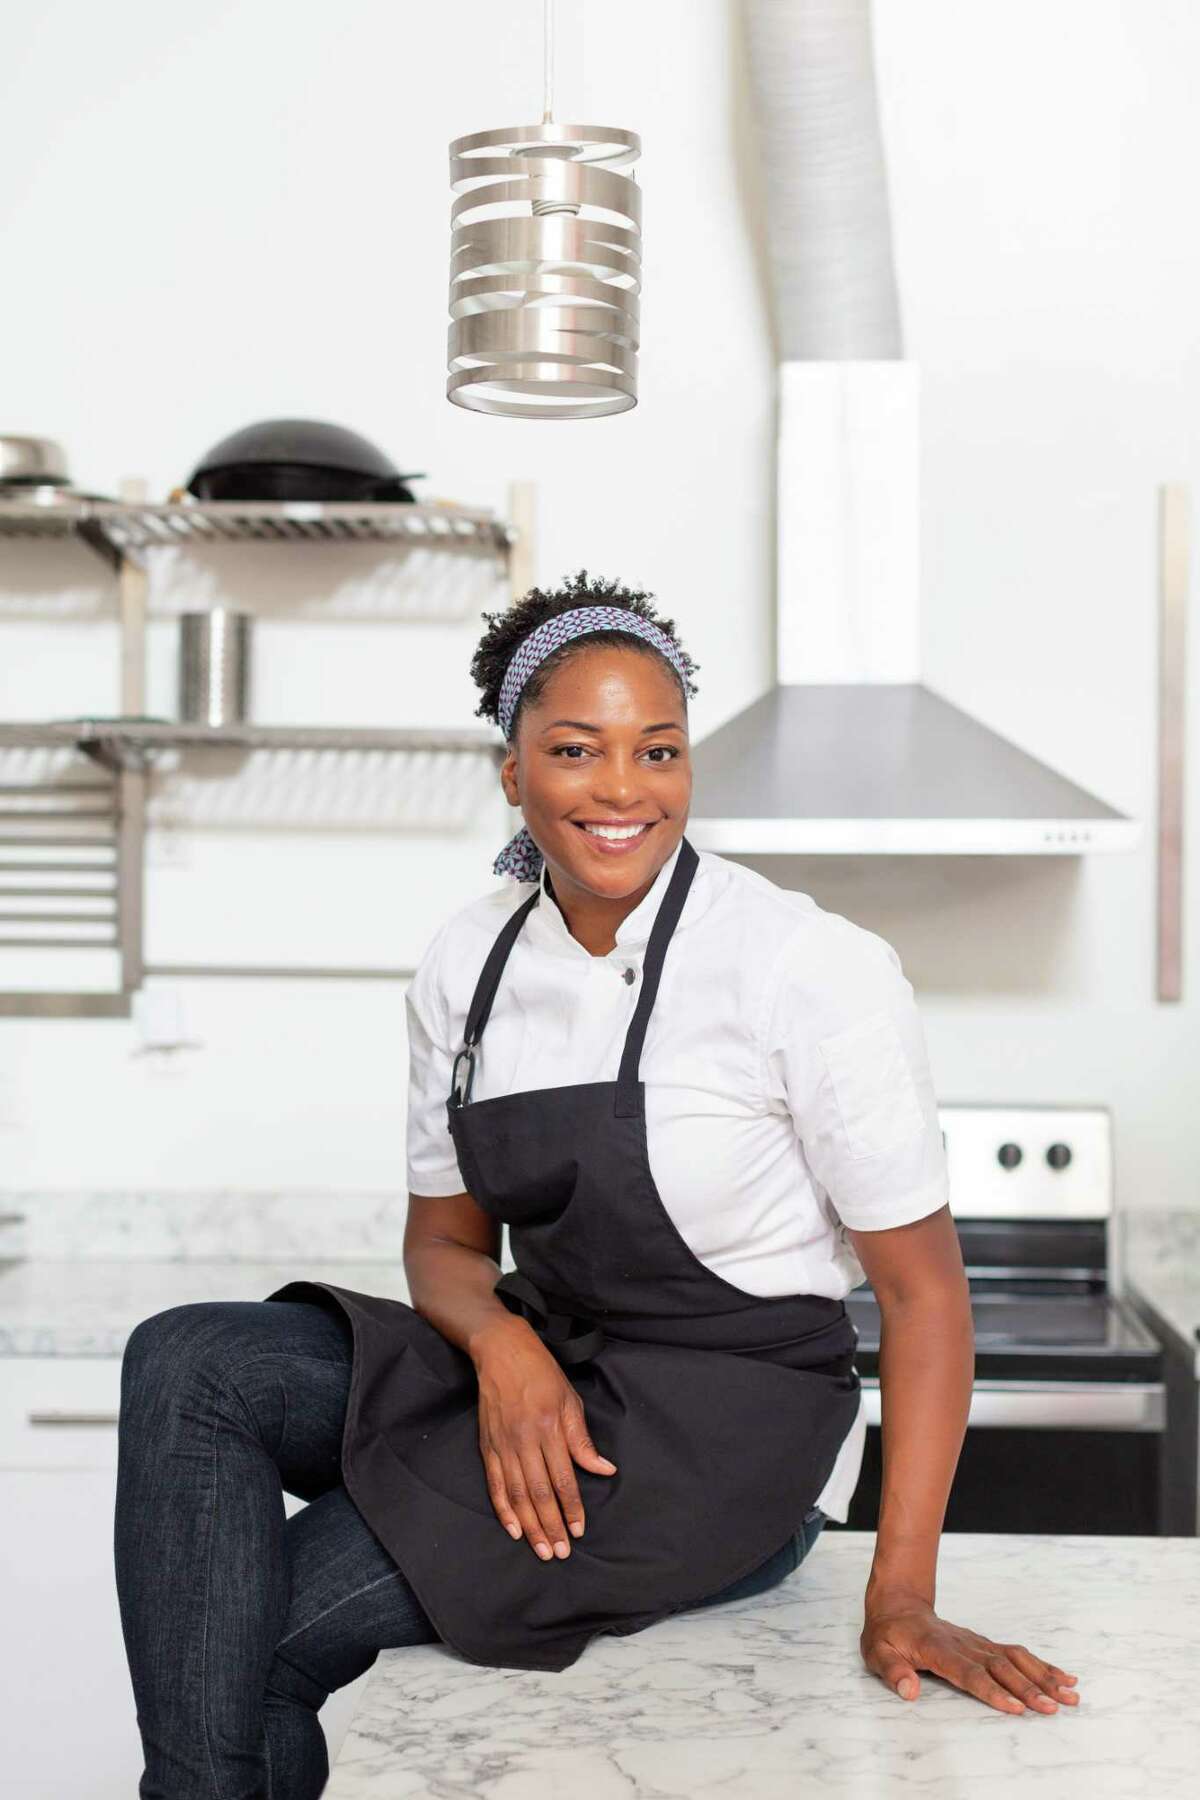 Chef Dawn Burrell will participate in the 10th annual James Beard Foundation’s Taste America Culinary Series on June 29.